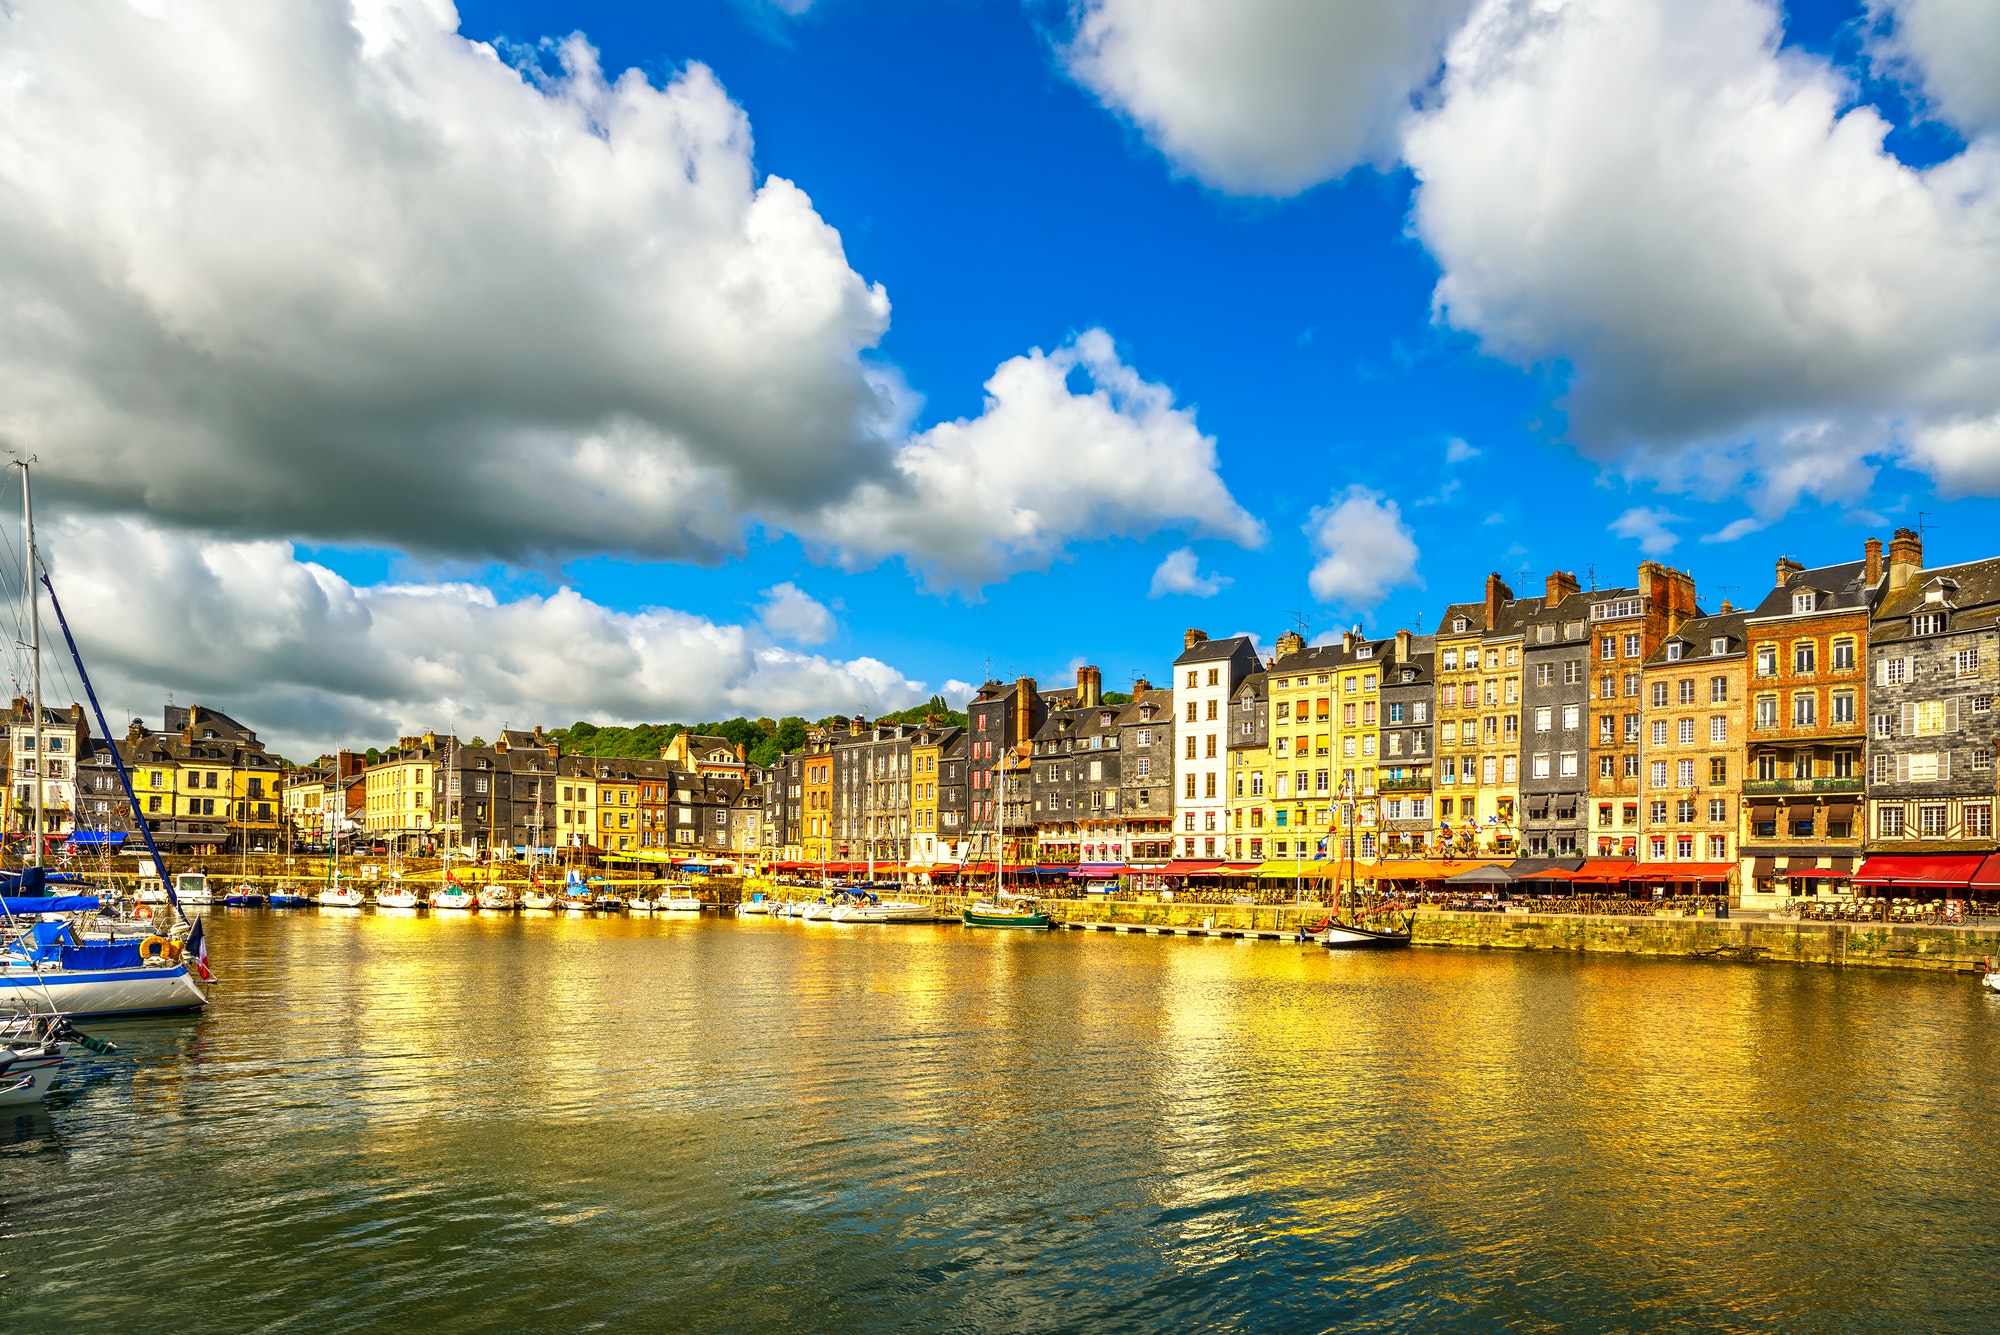 Honfleur skyline harbor and water. Normandy, France